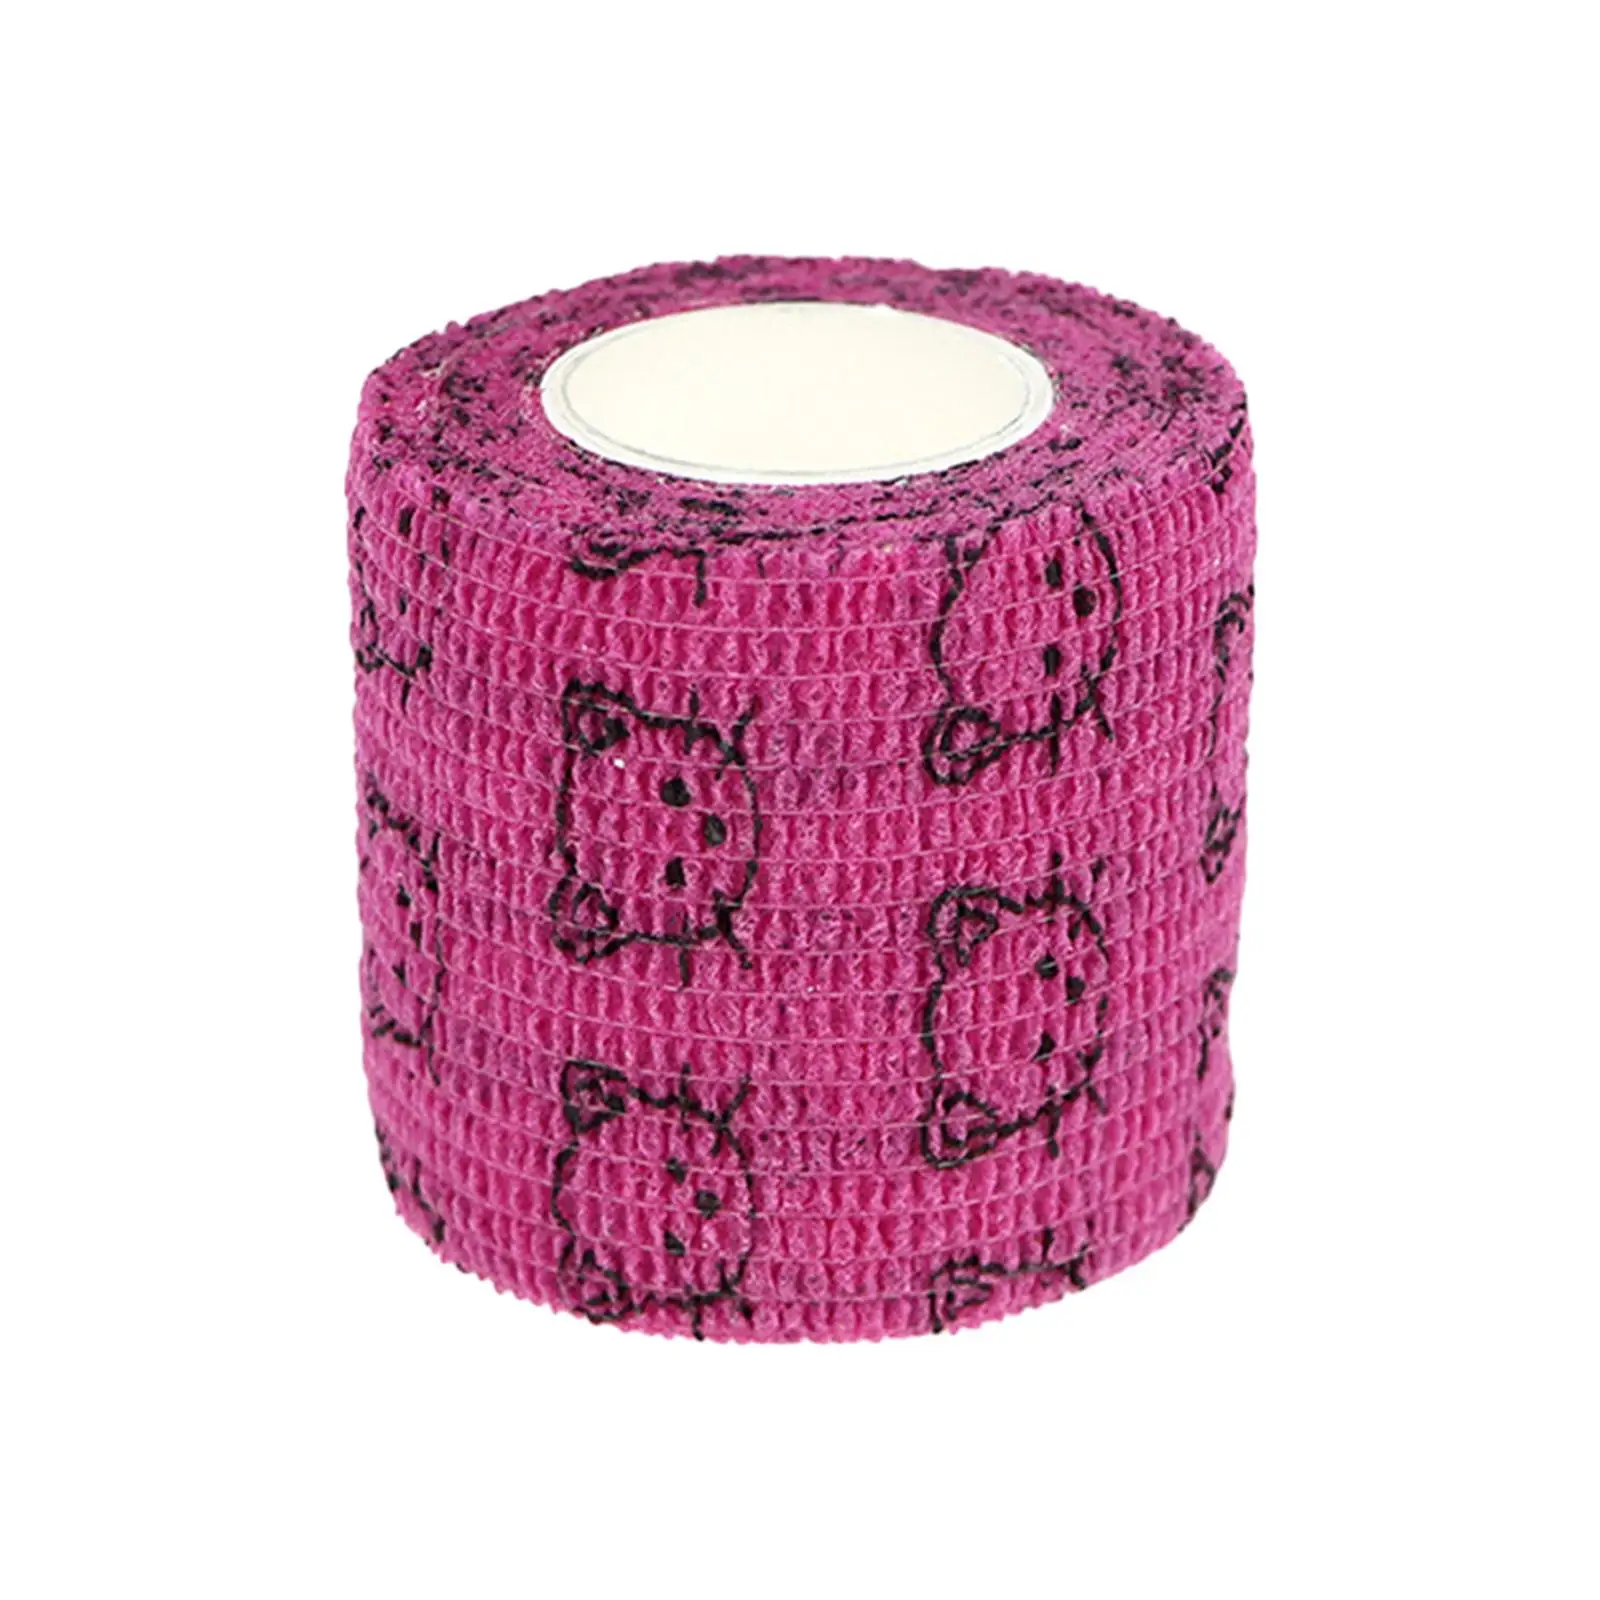 Self Adhesive Elastic Bandage Multi Function Protective Tape Non Woven 4.5M Pet Tape for Birds Hand Outdoor Sports Palm Finger